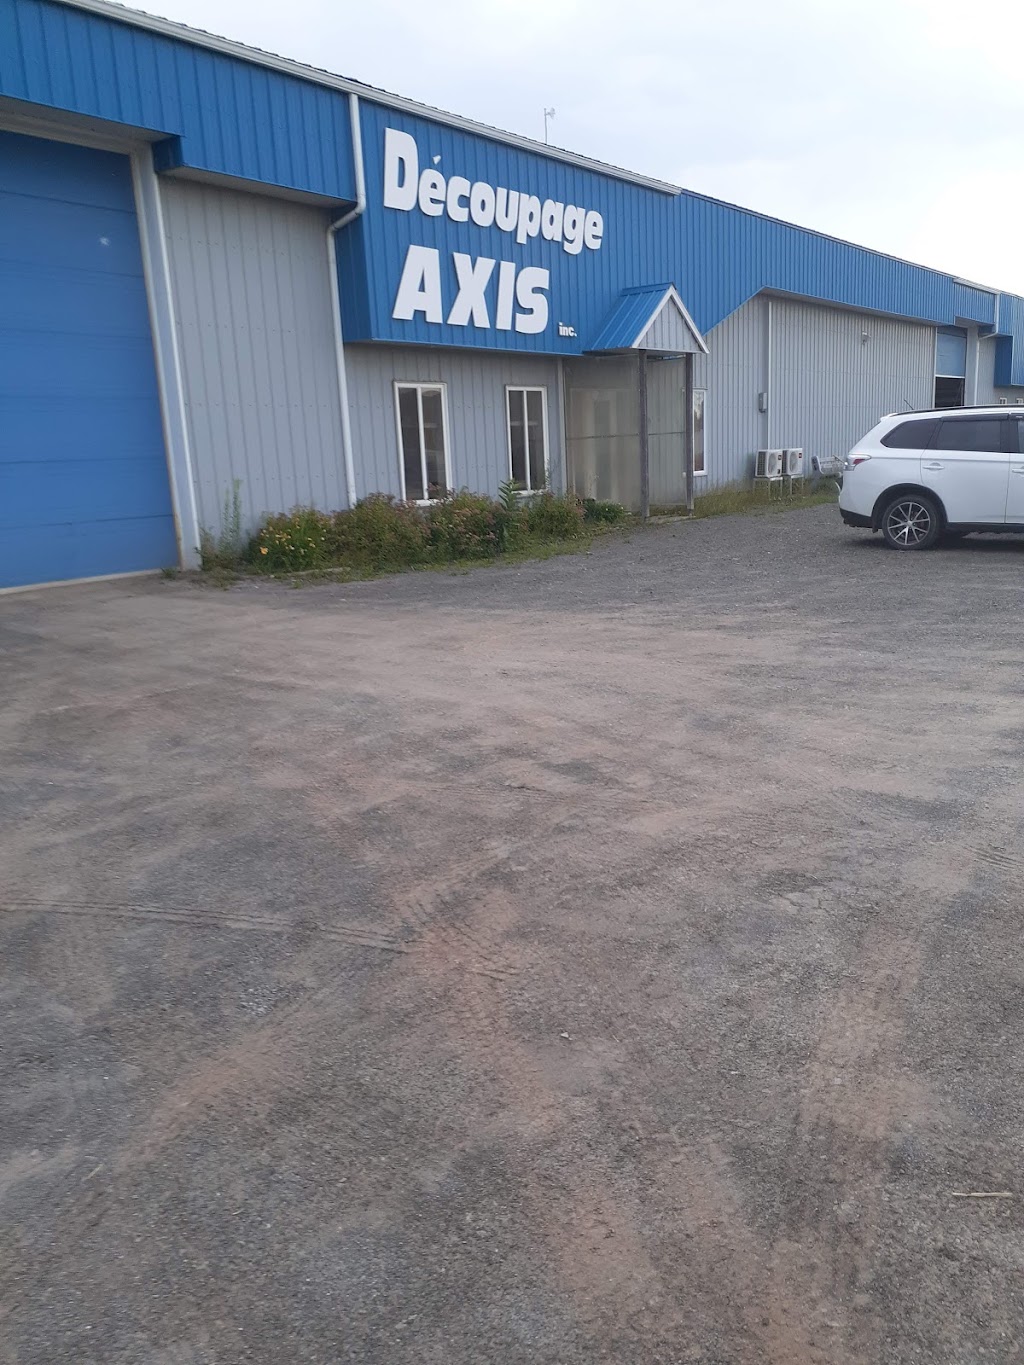 Découpage Axis | point of interest | 1230 Rue St Jacques O, Princeville, QC G6L 5K4, Canada | 8193645900 OR +1 819-364-5900